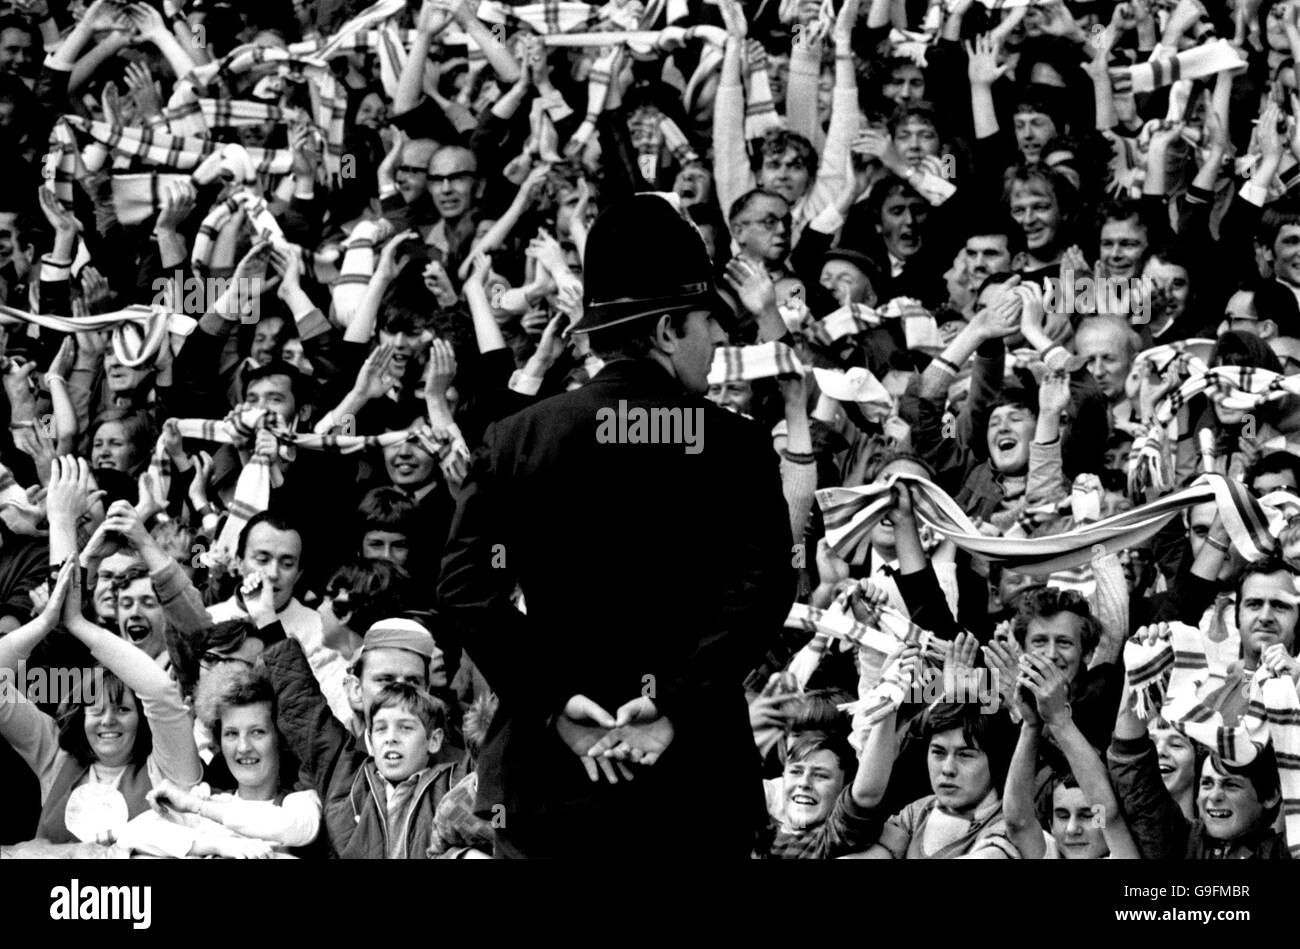 Soccer - Football League Division One - Leeds United v Chelsea - Elland Road. A policeman keeps his eye on the Leeds United fans. Stock Photo